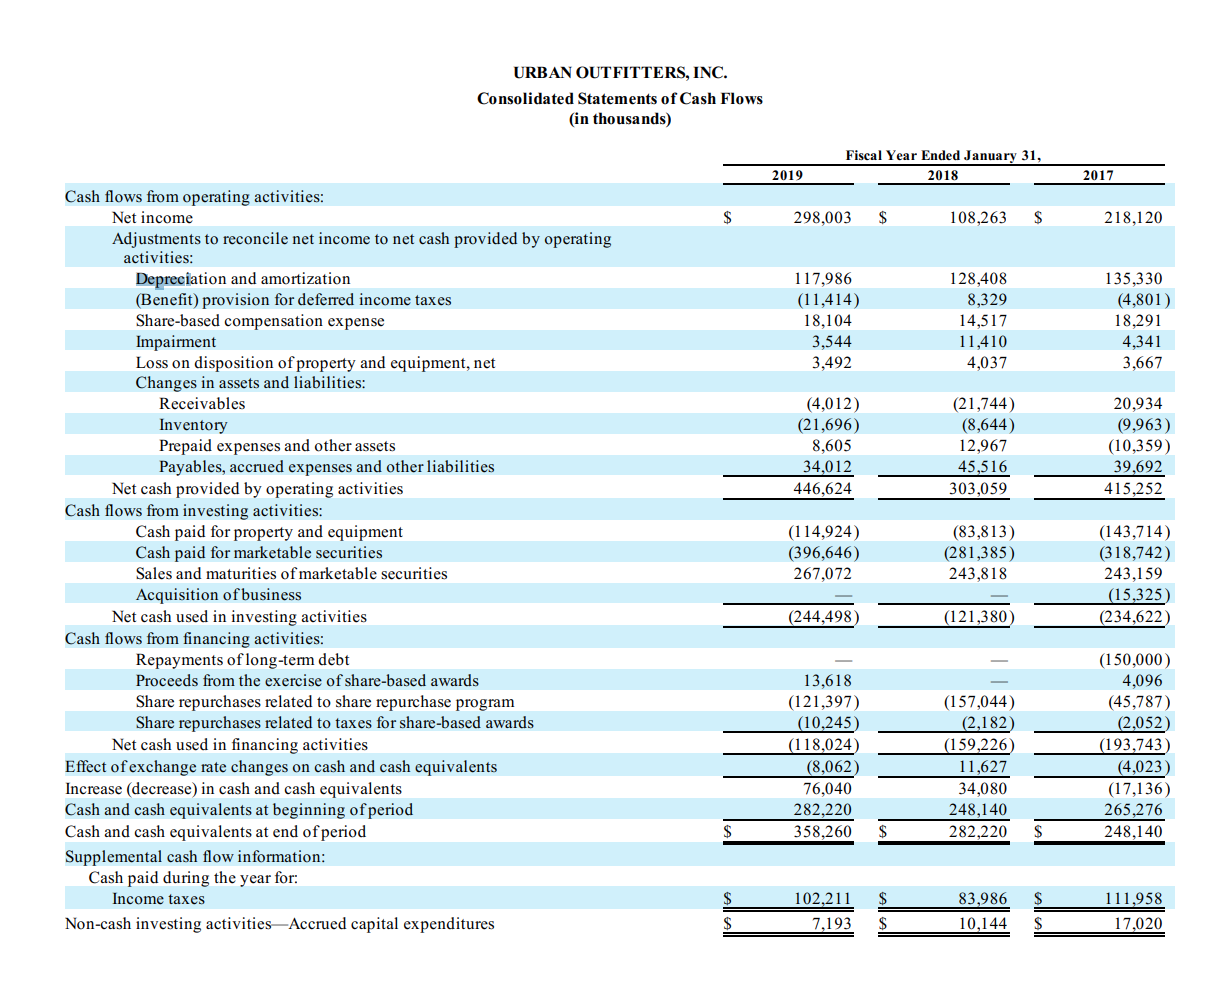 URBAN OUTFITTERS, INC.
Consolidated Statements of Cash Flows
(in thousands)
Fiscal Year Ended January 31,
2019
2018
2017
Cash flows from operating activities:
Net income
298,003
108,263
218,120
Adjustments to reconcile net income to net cash provided by operating
activities:
Depreciation and amortization
(Benefit) provision for deferred income taxes
Share-based compensation expense
Impairment
Loss on disposition of property and equipment, net
Changes in assets and liabilities:
128,408
8,329
14,517
11,410
117,986
135,330
(11,414)
18,104
3,544
3,492
(4,801)
18,291
4,341
3,667
4,037
(21,744)
(8,644)
12,967
45,516
Receivables
Inventory
Prepaid expenses and other assets
Payables, accrued expenses and other liabilities
Net cash provided by operating activities
(4,012)
(21,696)
8,605
20,934
(9,963)
(10,359)
39,692
415,252
34,012
446,624
303,059
Cash flows from investing activities:
(114,924)
(396,646)
267,072
(143,714)
(318,742)
243,159
(15,325)
(234,622)
Cash paid for property and equipment
Cash paid for marketable securities
(83,813)
(281,385)
243,818
Sales and maturities of marketable securities
Acquisition of business
Net cash used in investing activities
(244,498)
(121,380)
Cash flows from financing activities:
(150,000)
4,096
(45,787)
(2,052)
(193,743)
(4,023)
(17,136)
265,276
248,140
Repayments of long-tem debt
Proceeds from the exercise of share-based awards
13,618
(121,397)
(10,245)
(118,024)
Share repurchases related to share repurchase program
Share repurchases related to taxes for share-based awards
(157,044)
(2,182)
(159,226)
Net cash used in financing activities
Effect of exchange rate changes on cash and cash equivalents
Increase (decrease) in cash and cash equivalents
Cash and cash equivalents at beginning of period
Cash and cash equivalents at end of period
(8,062)
11,627
76,040
282,220
34,080
248,140
358,260
282,220
Supplemental cash flow information:
Cash paid during the year for:
Income taxes
$
102,211
83,986
111,958
Non-cash investing activities-Accrued capital expenditures
7,193
10,144
17,020
